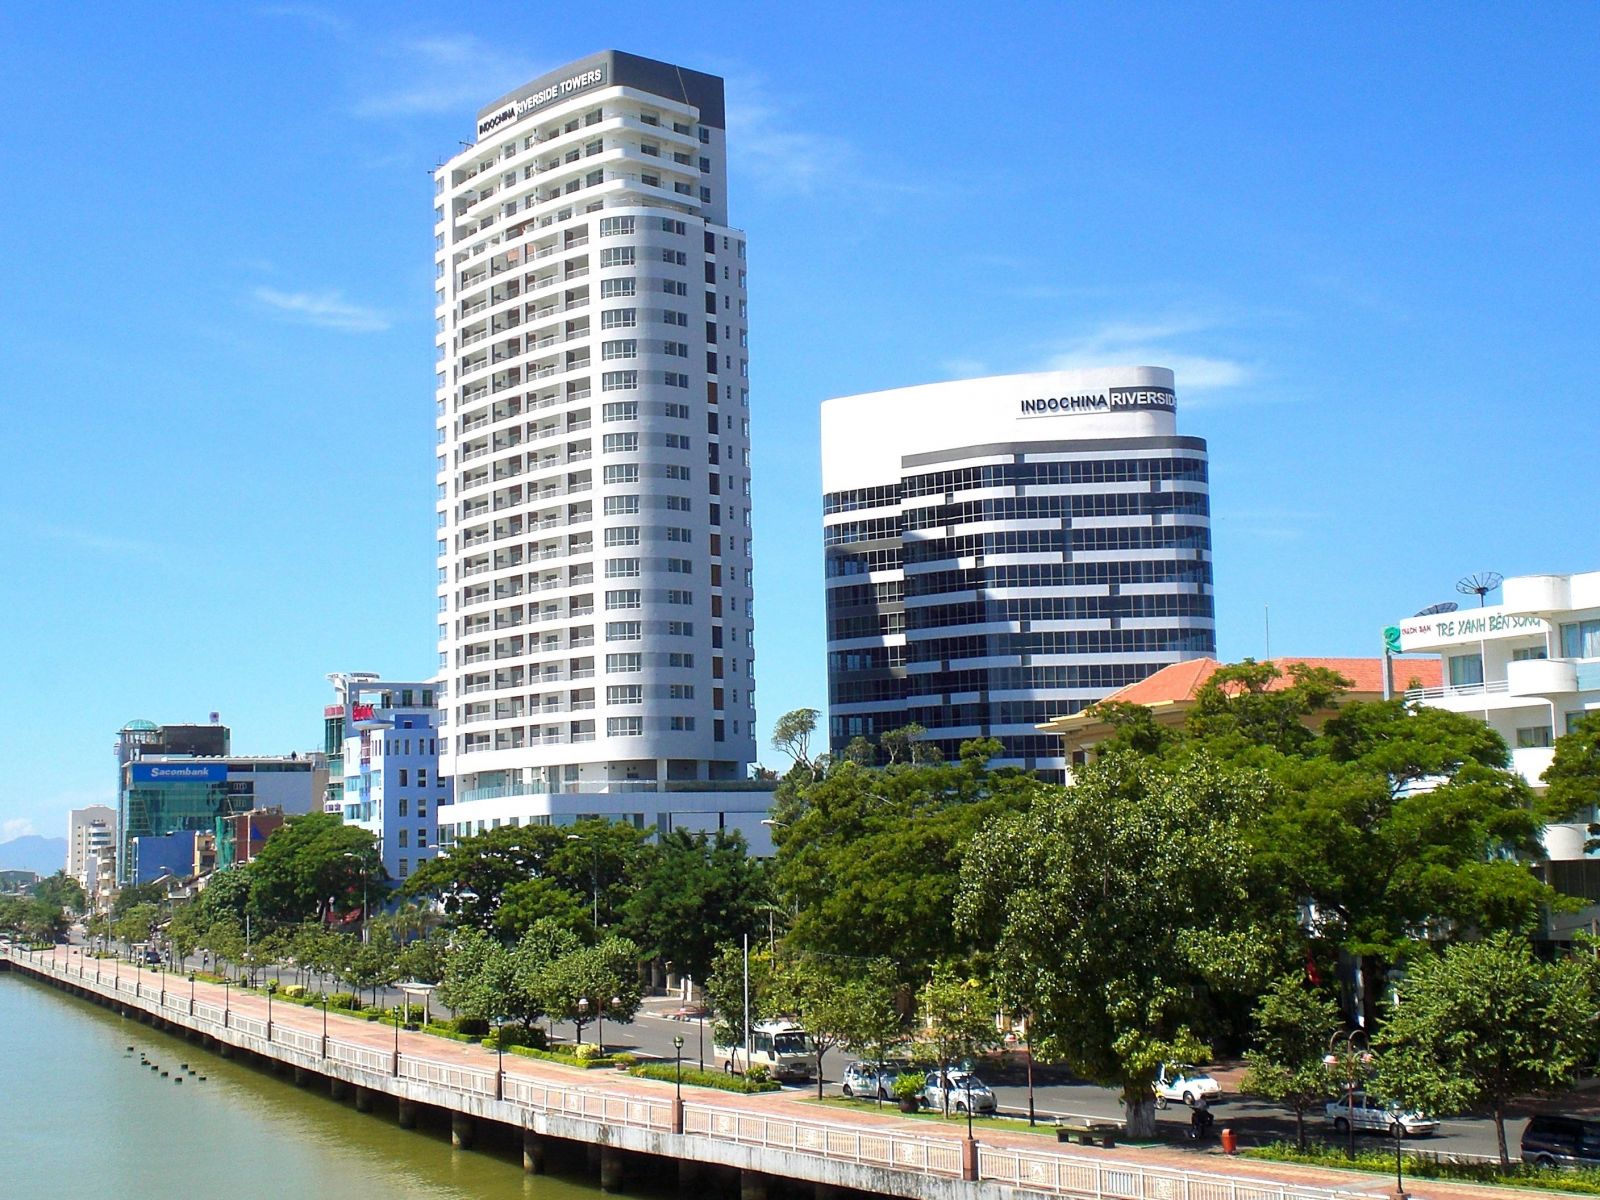 As Da Nang is Vietnam’s third largest economic center, the demand for office space in Da Nang can only increase.